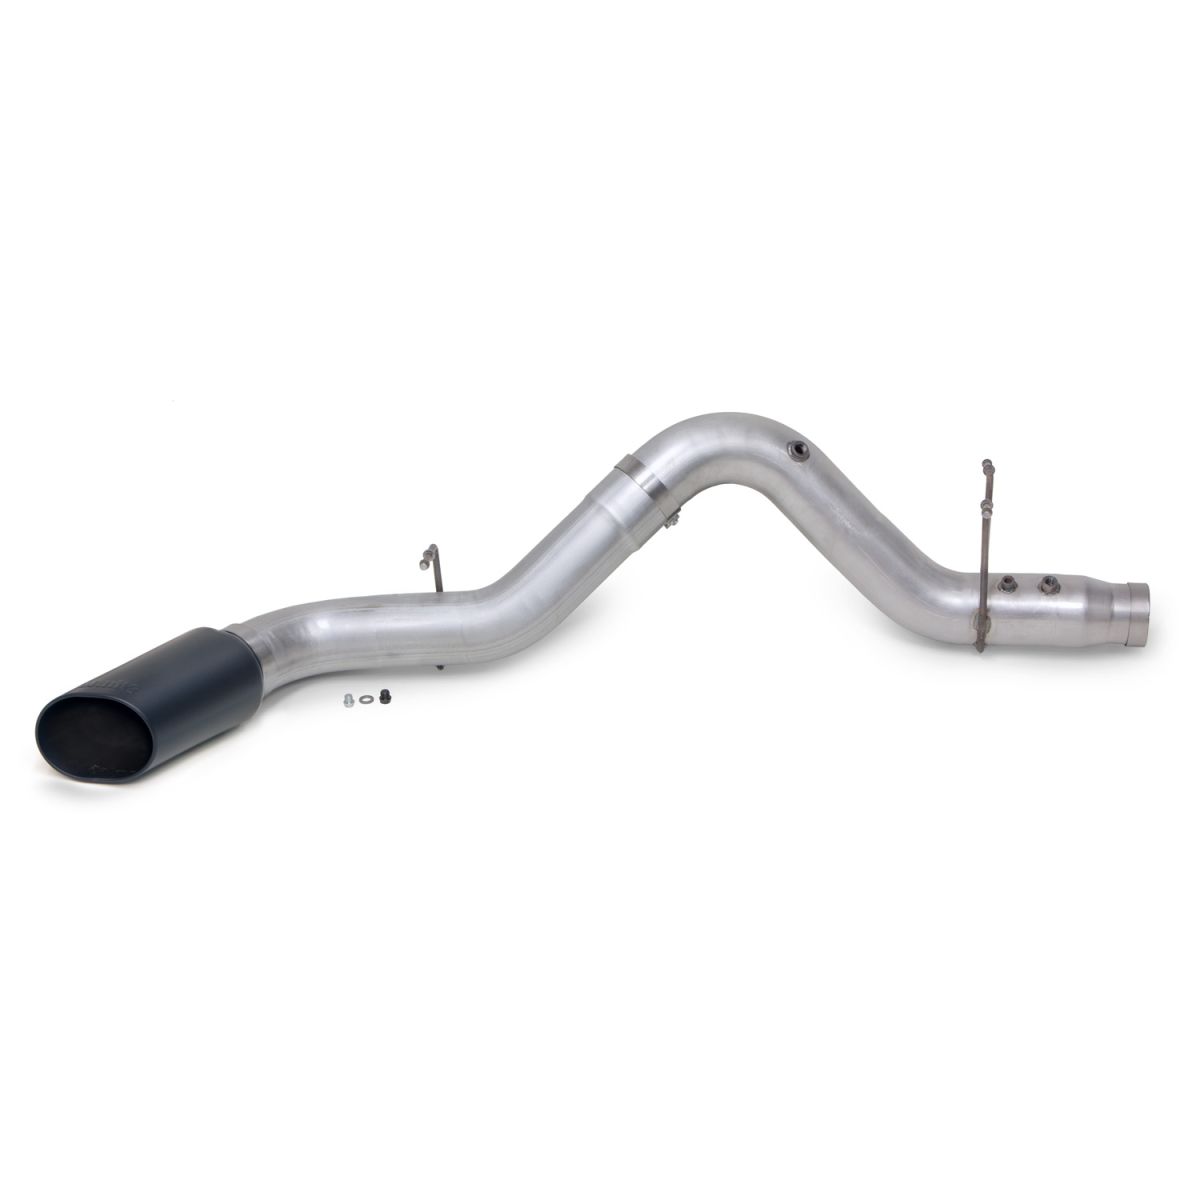 Banks Power - Banks Power Monster Exhaust System 5-inch Single Exit Black Tip 2017-2019 Chevy/GMC 2500/3500 Duramax 6.6L L5P